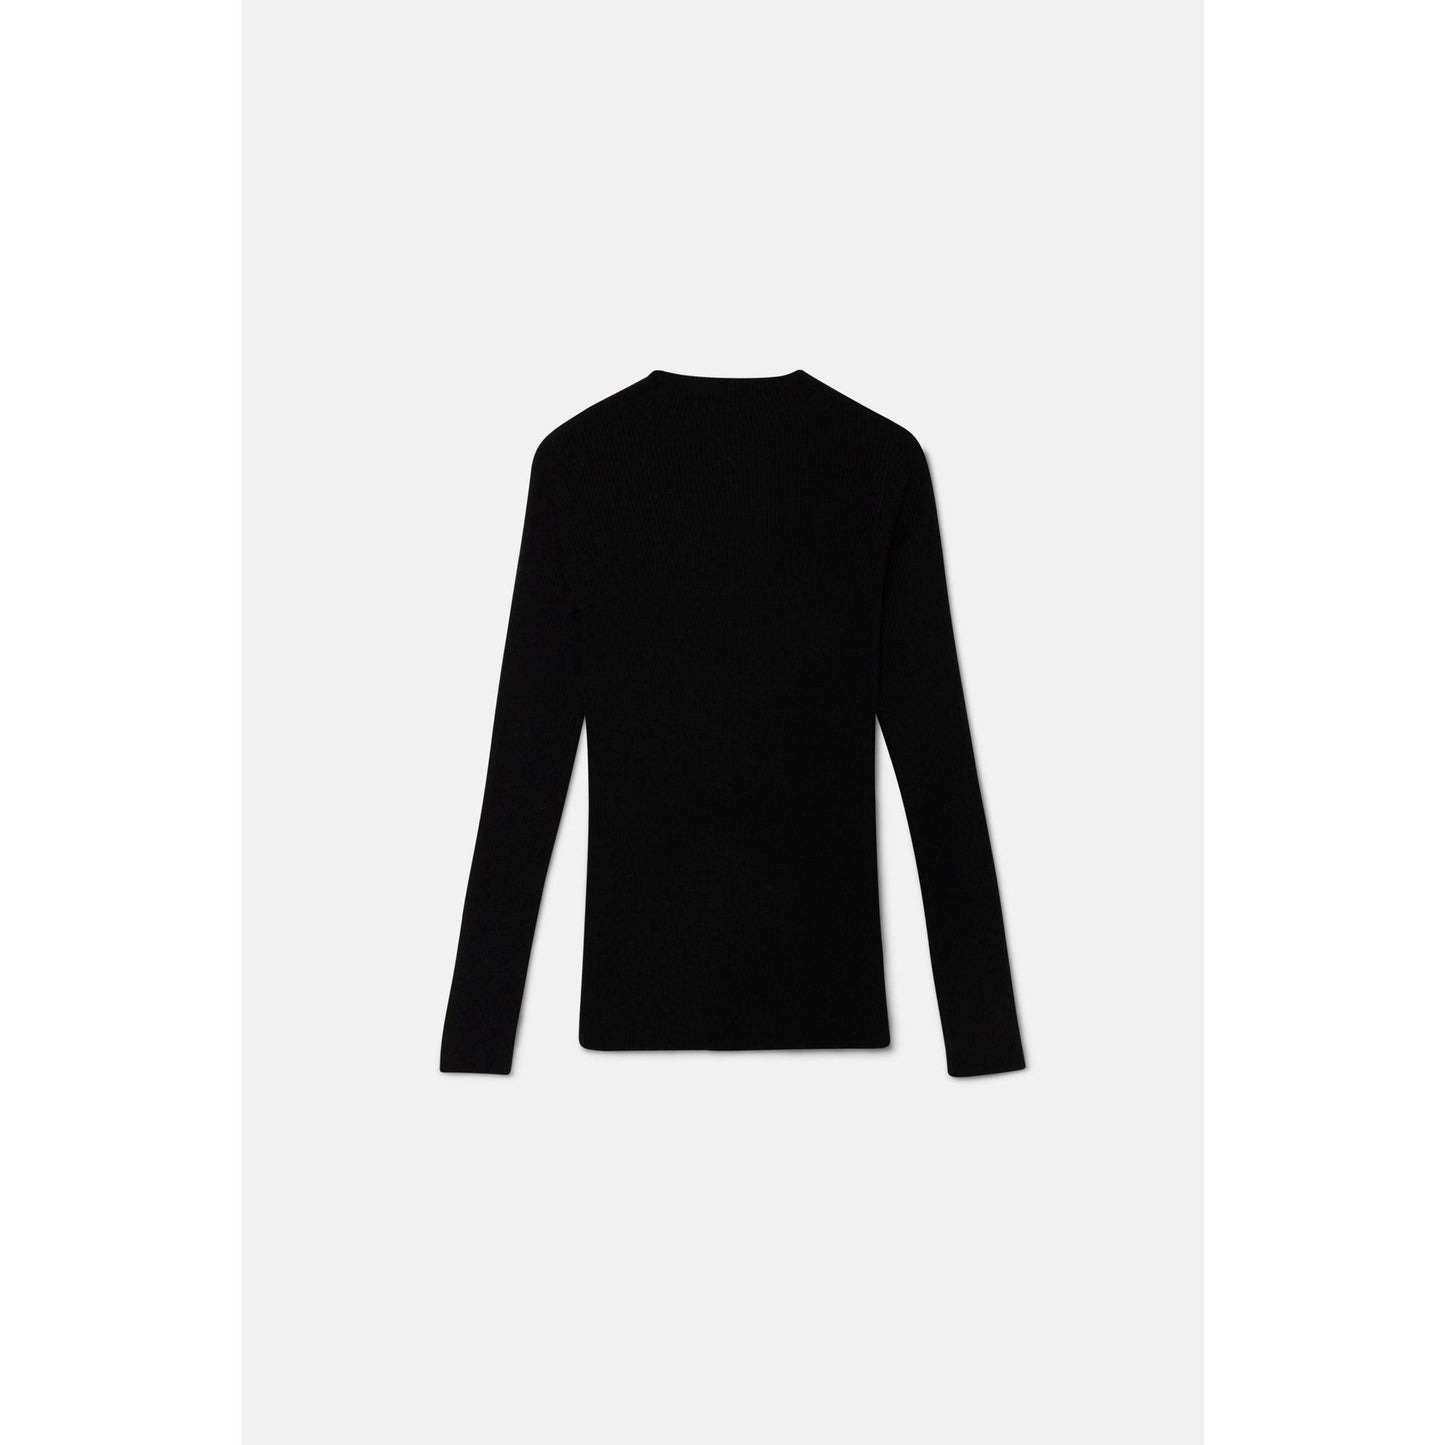 Compania Fantastica - Black ribbed knit sweater with perkins collar